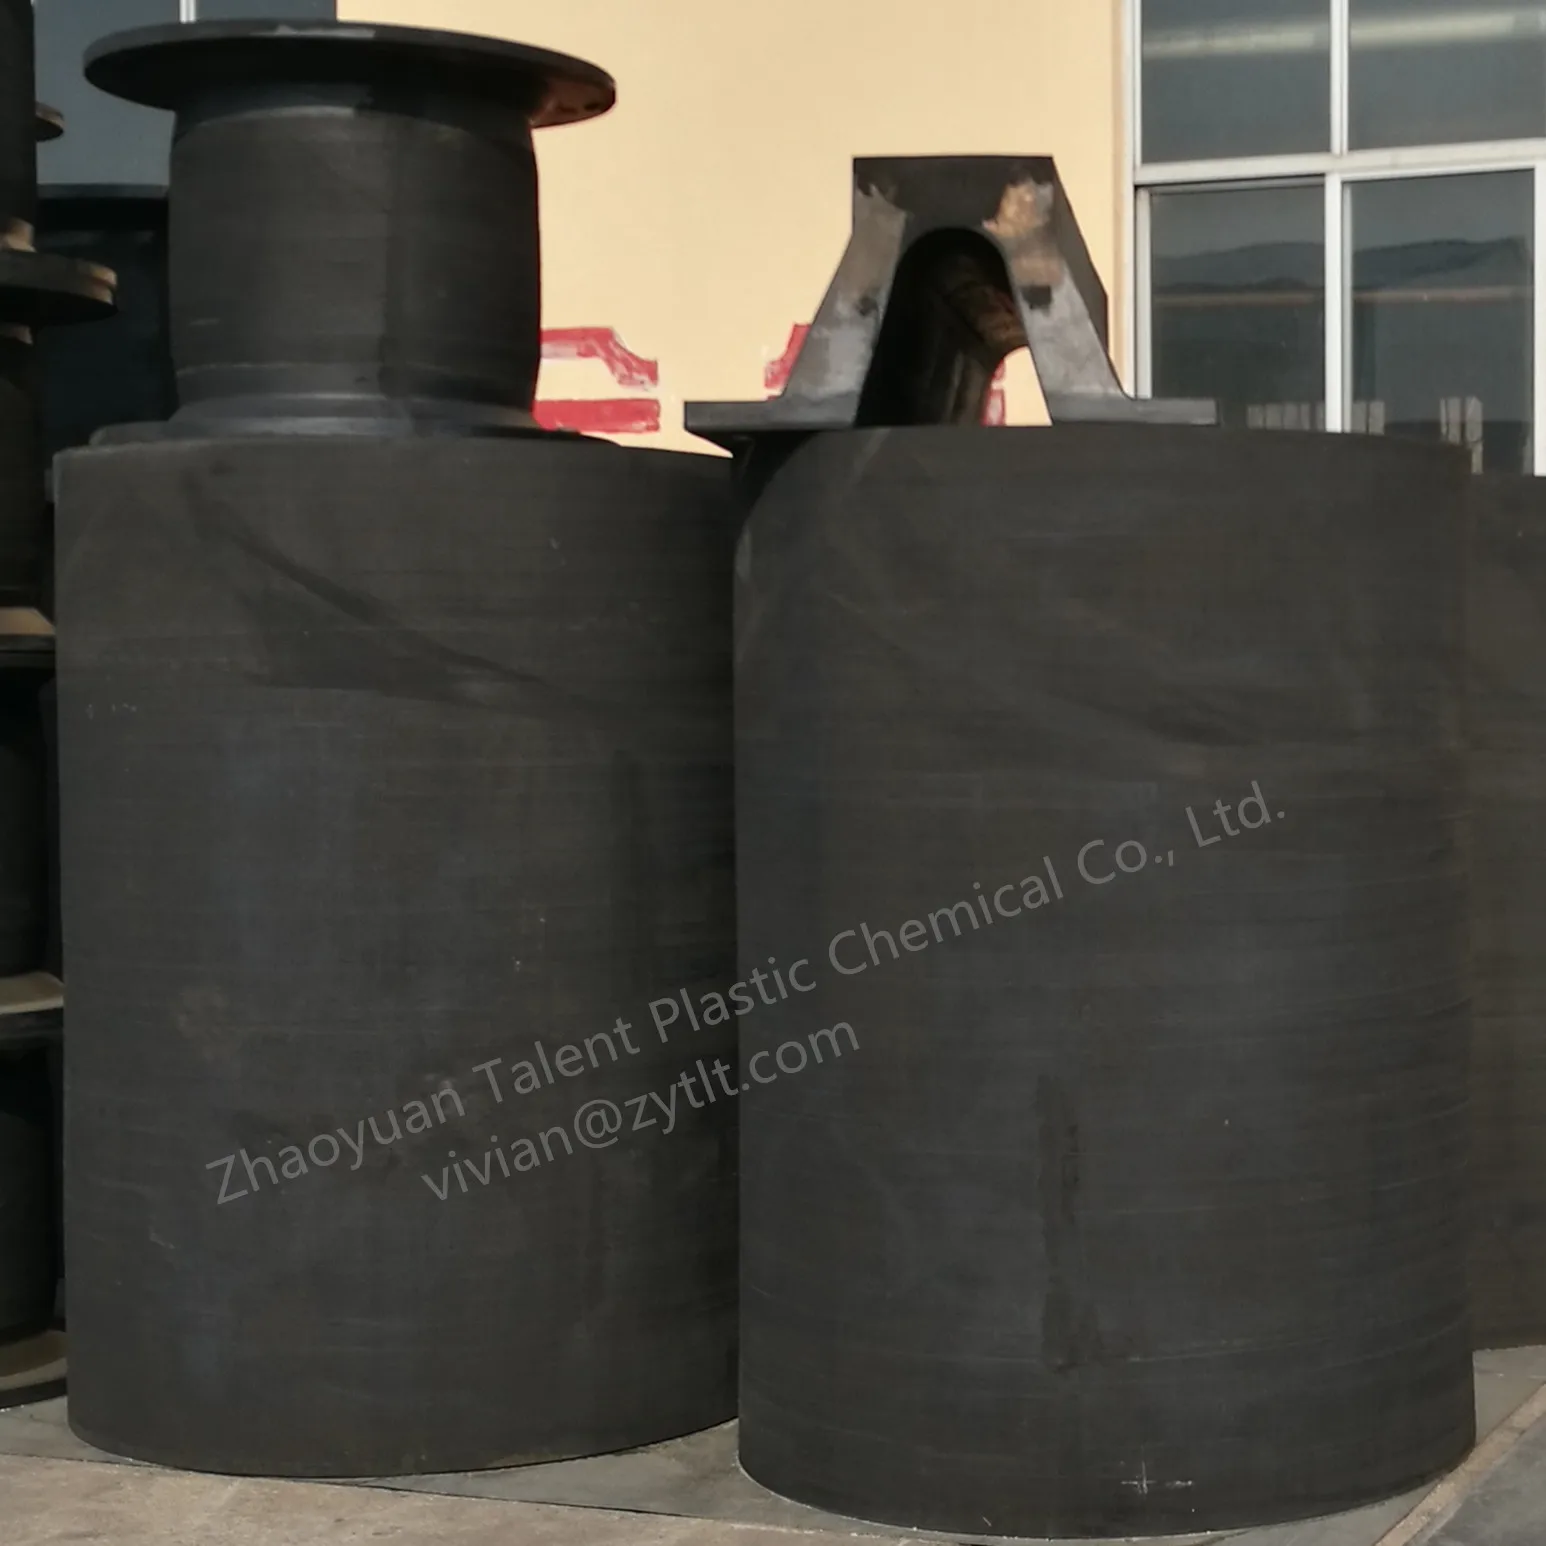 natural rubber/EPDM cylindrical marine boat fender in different size